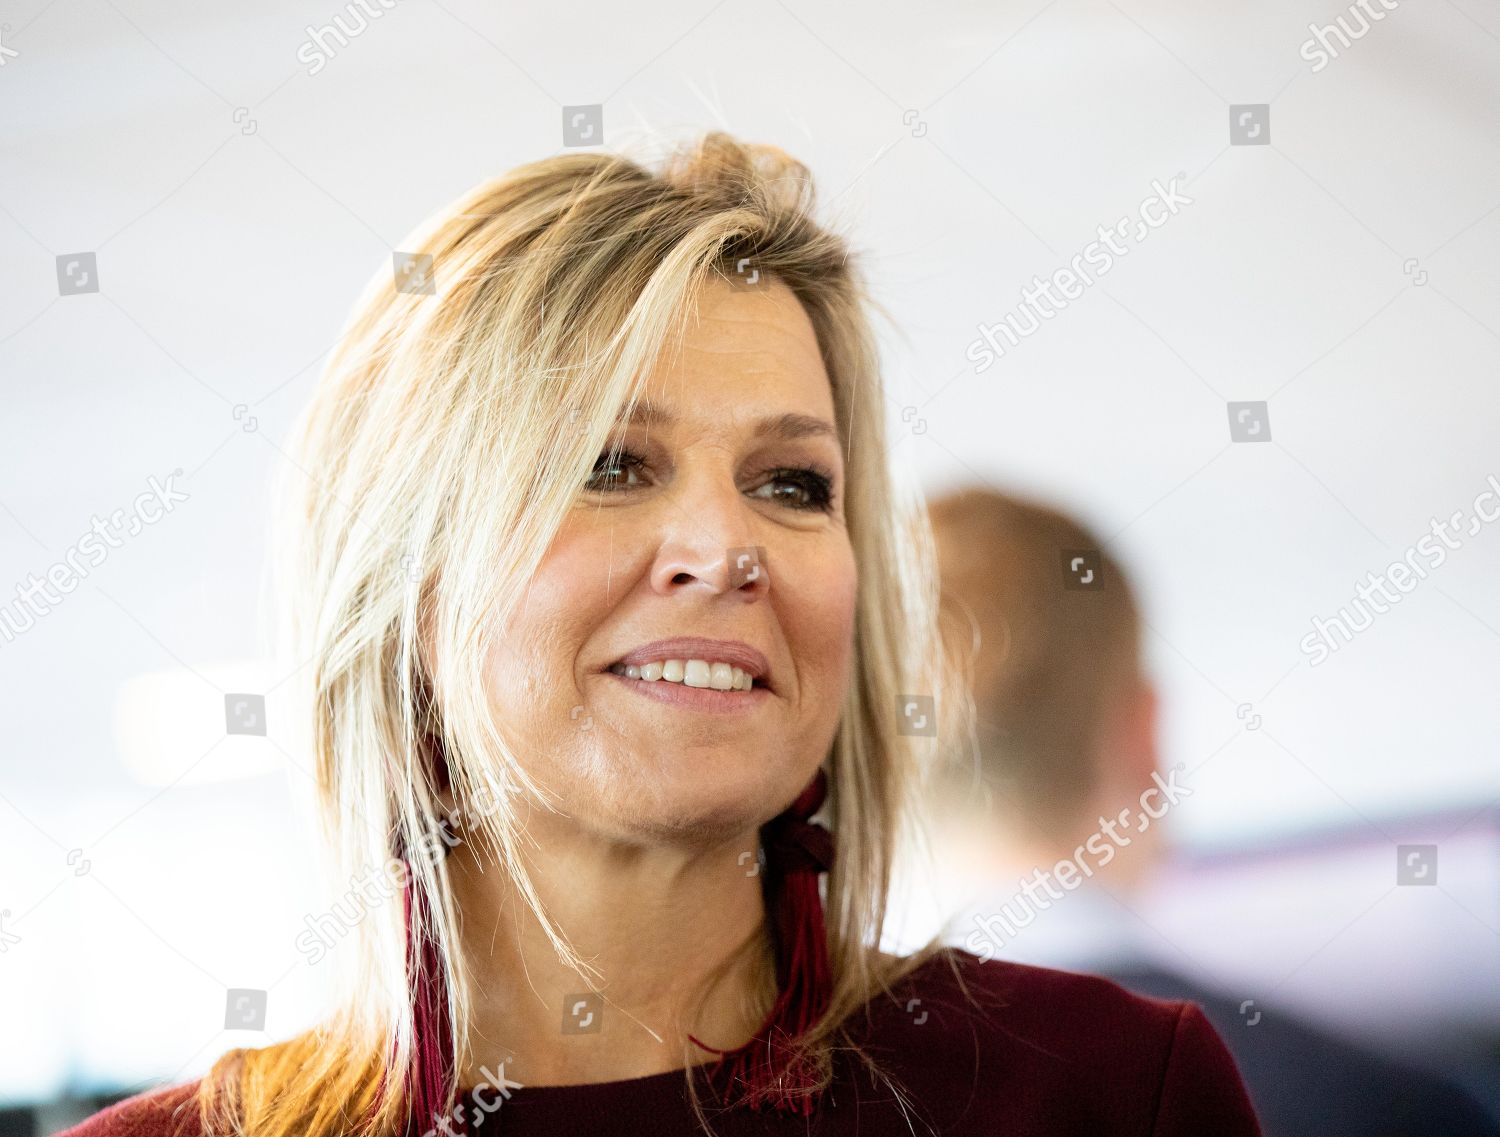 queen-maxima-visit-to-afas-software-netherlands-shutterstock-editorial-10076048ae.jpg